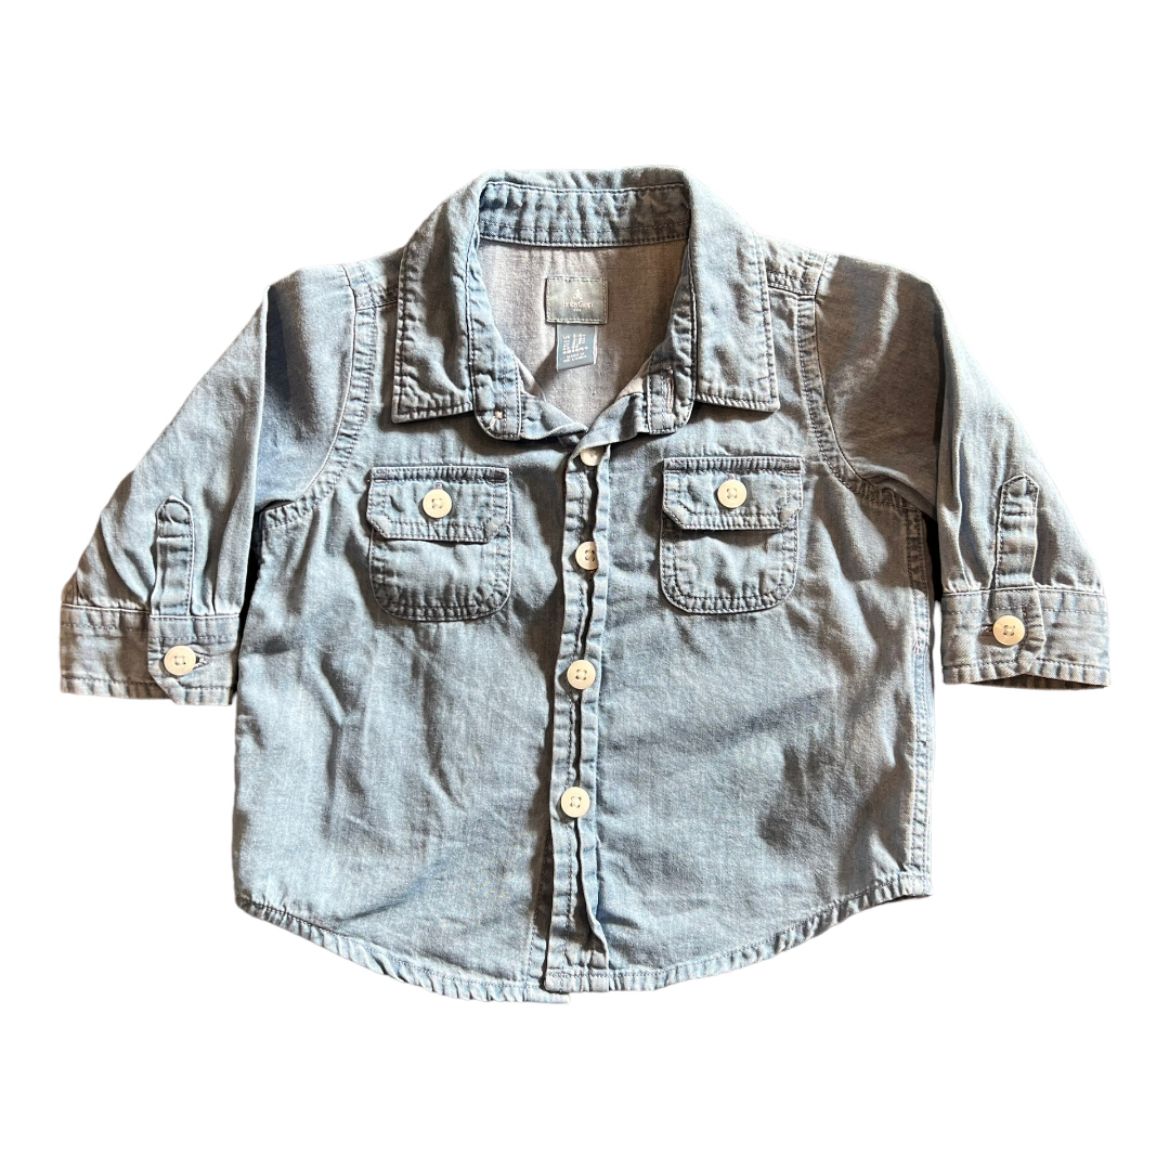 Lilo - NZ's marketplace for buying and selling secondhand kids clothing. Baby  Gap Denim Shirt, size 3-6 months